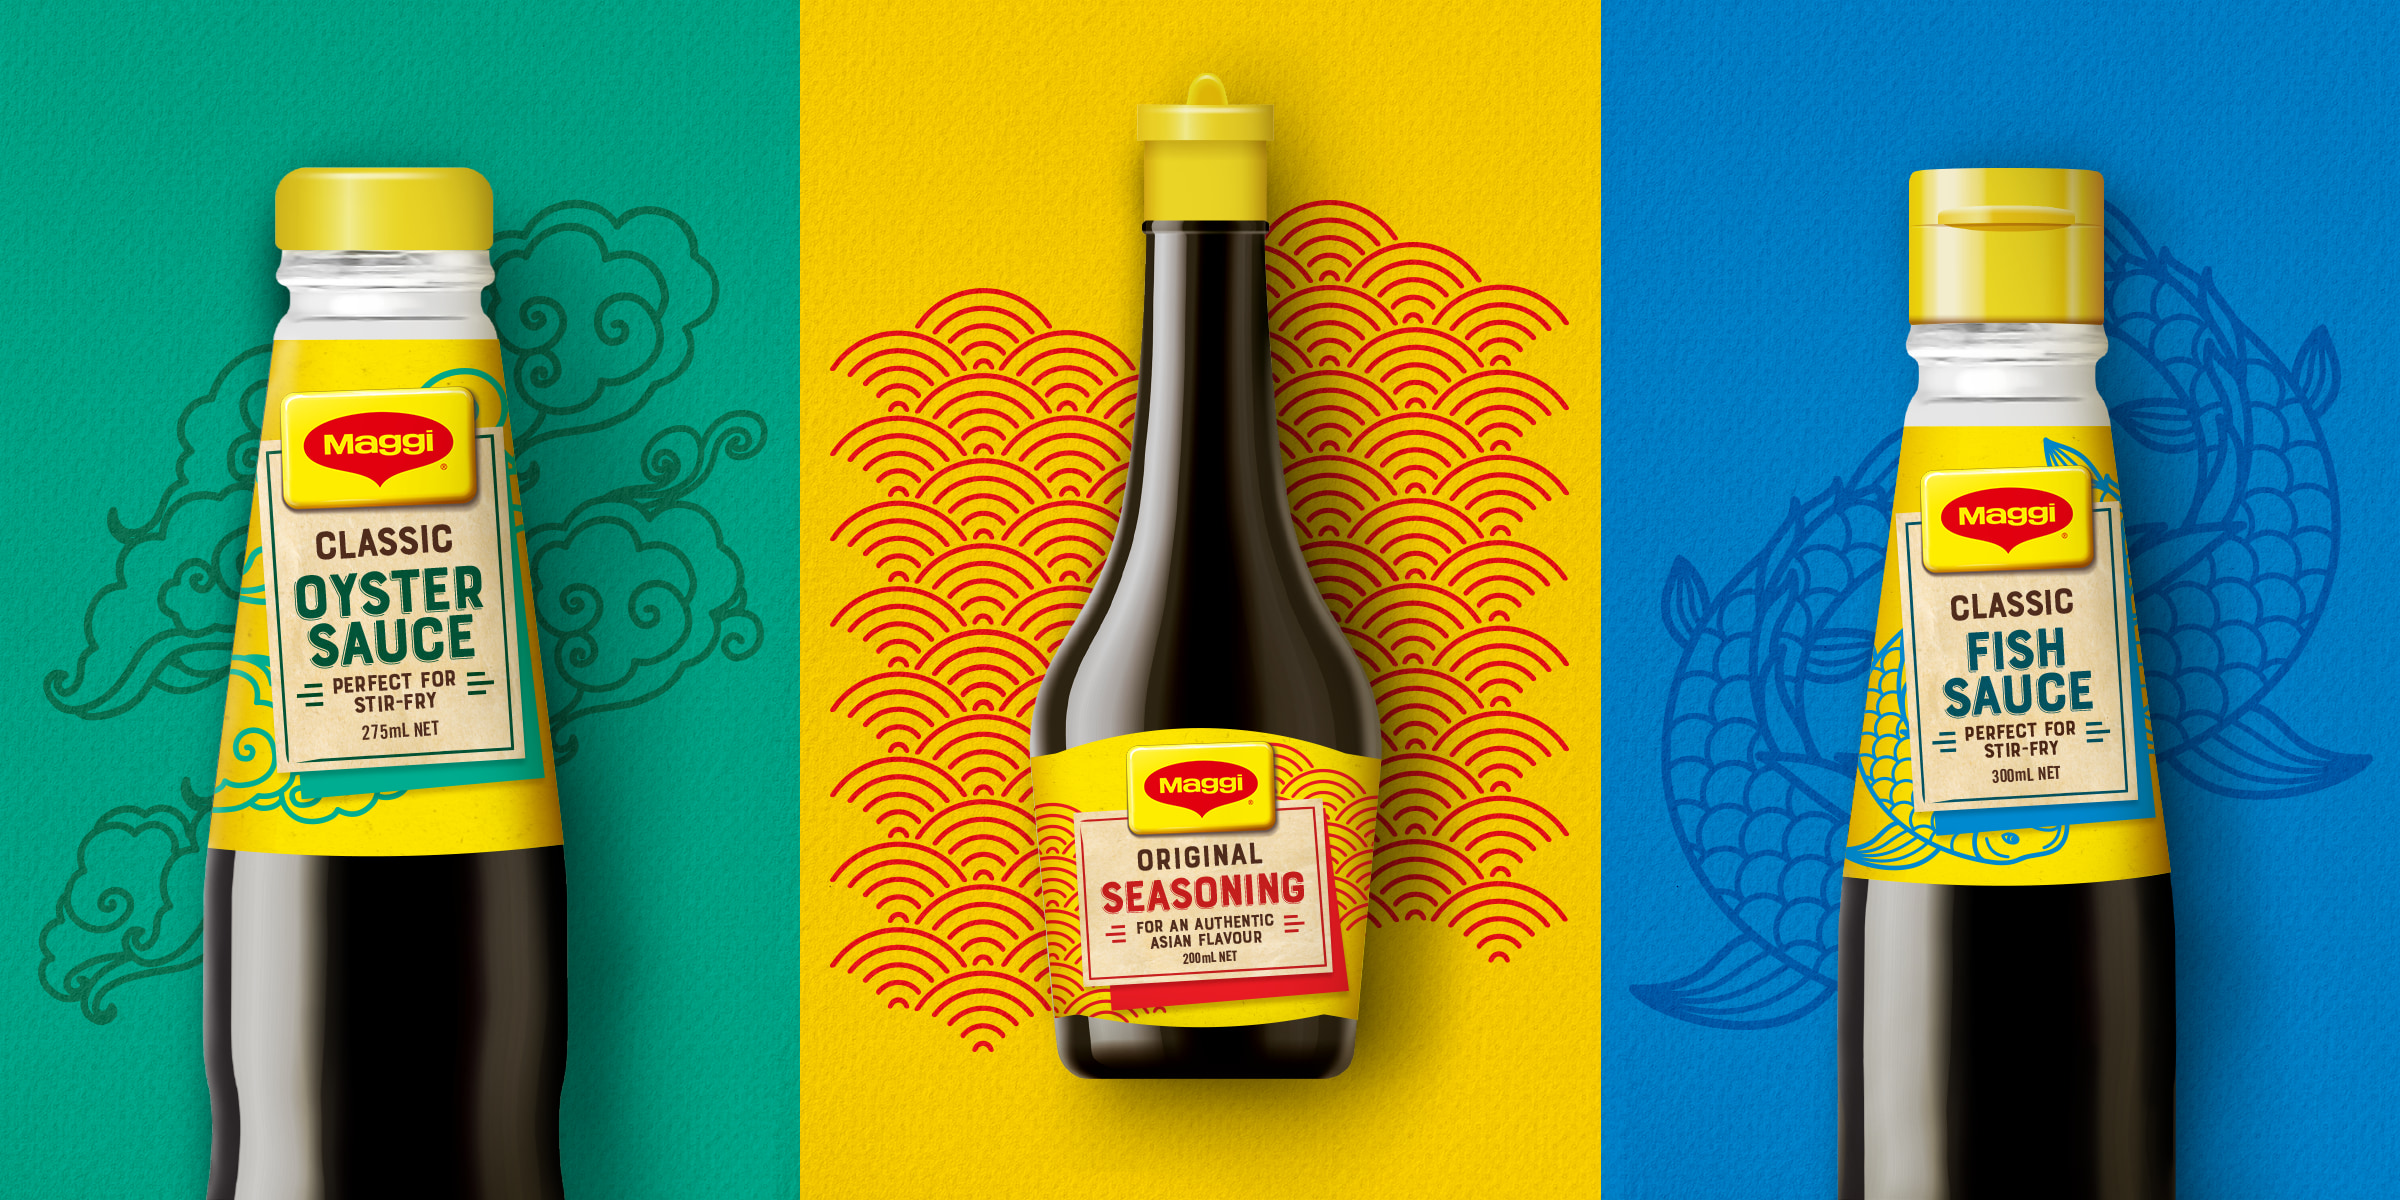 fish-sauce-original-seasoning-oyster-sauce-packaging-redesign-branding-boxer-and-co